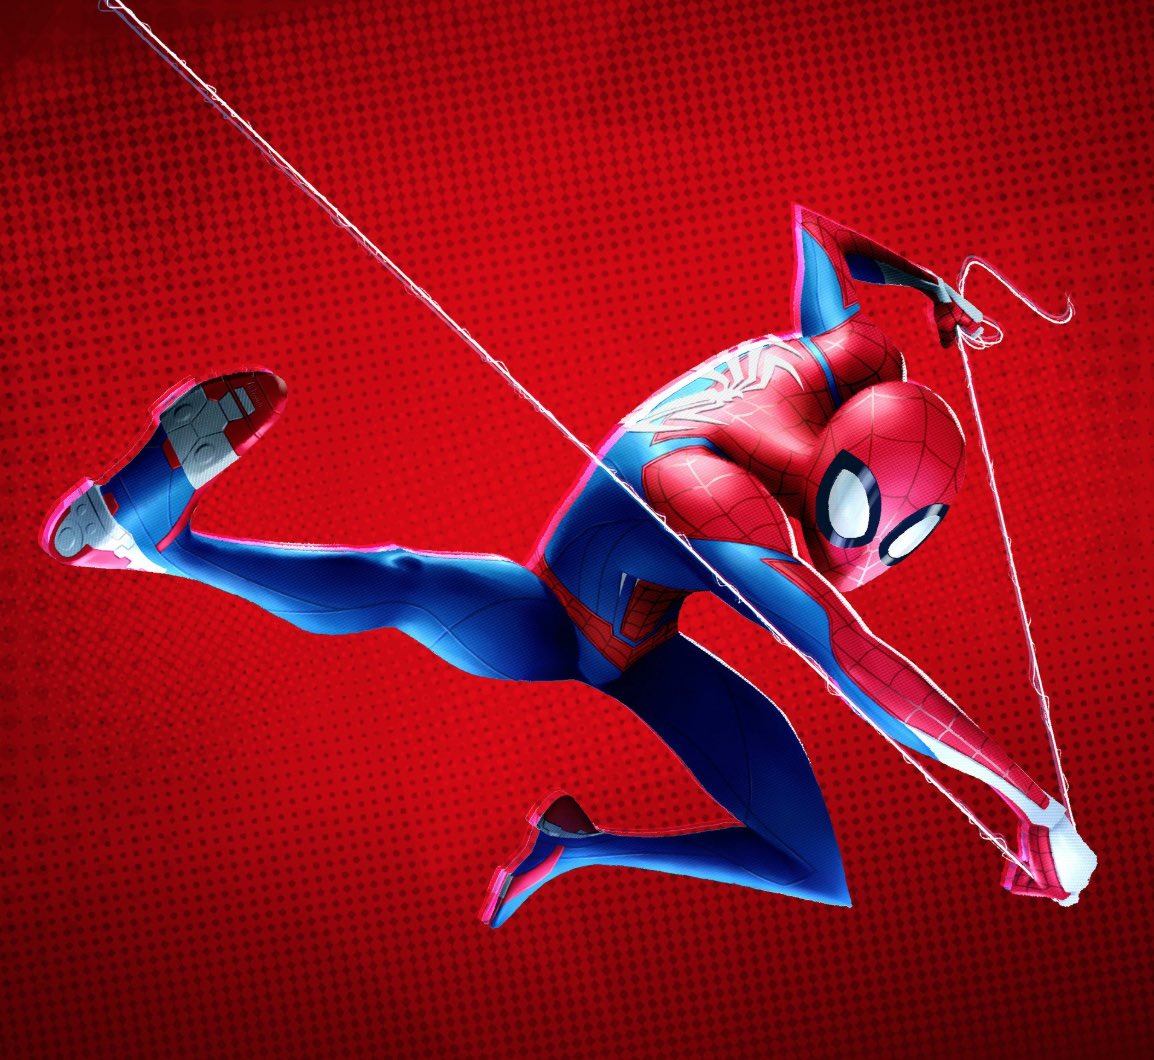 RT @cb_keenan: I SWEAR IF INSOMNIAC’S SPIDER-MAN IS IN ACROSS THE SPIDER-VERSE I WILL DIE OF HAPPINESS https://t.co/GfTXwAqYGH